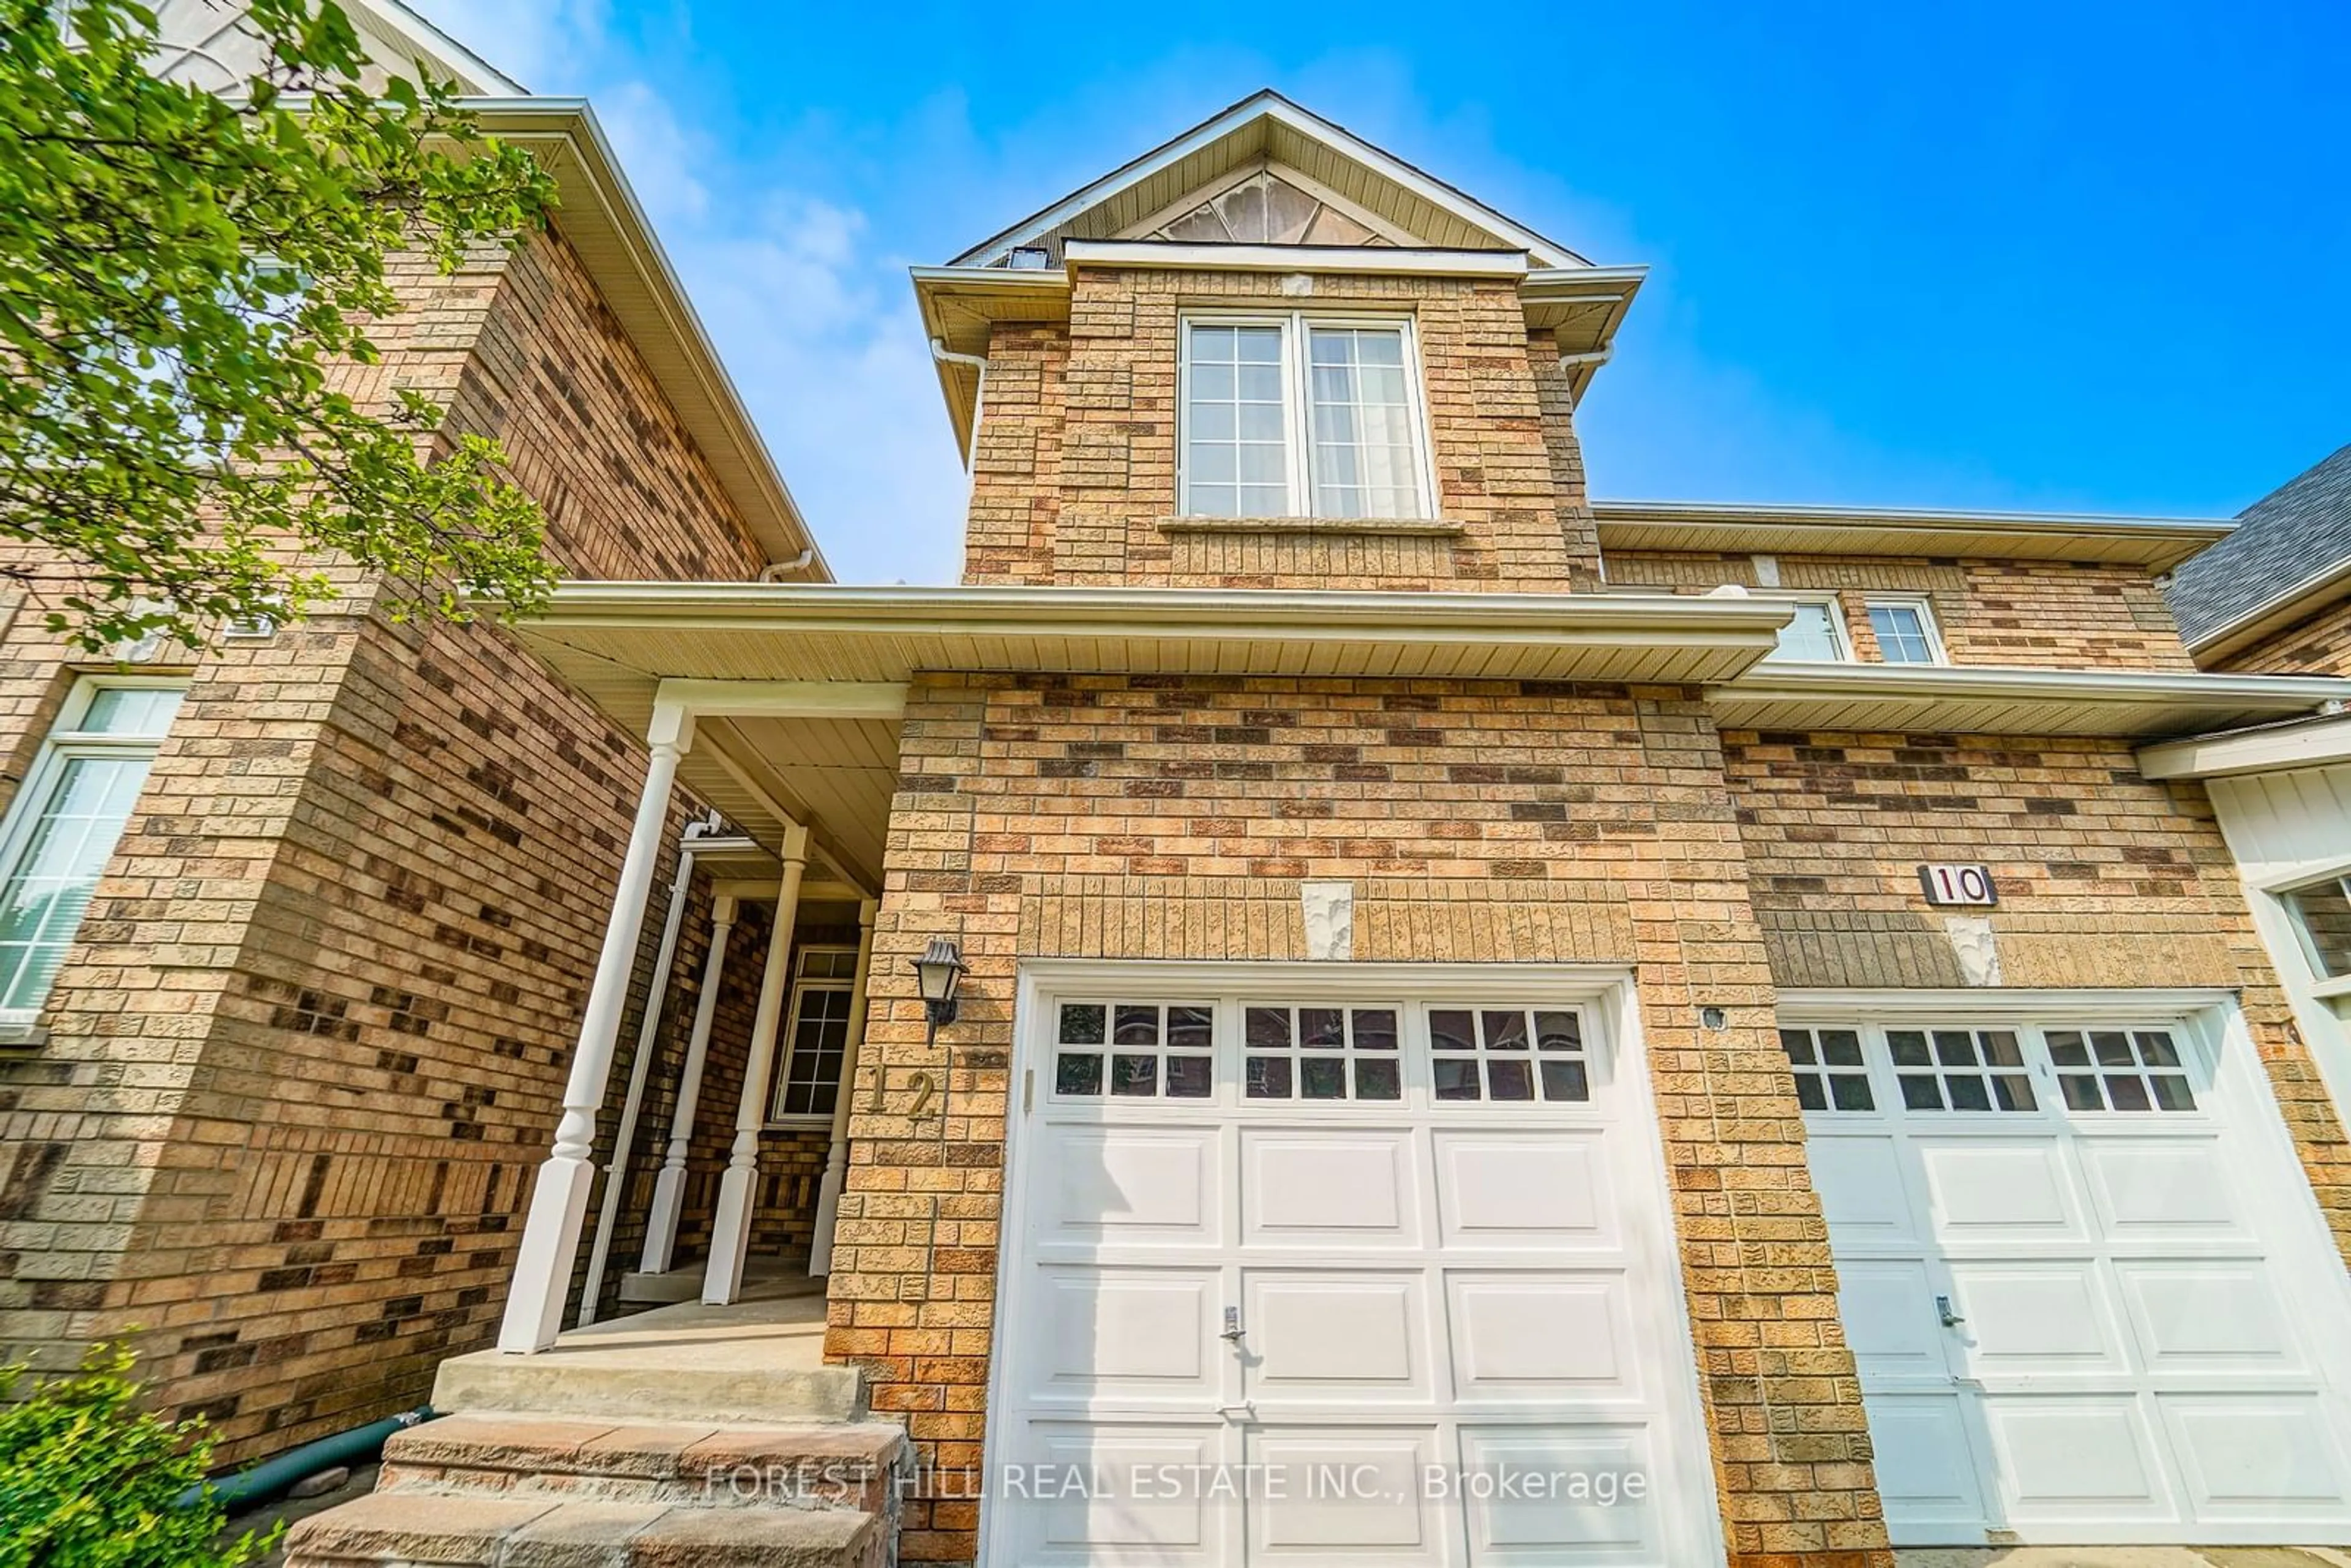 Home with brick exterior material for 12 Ebony Gate, Richmond Hill Ontario L4S 2C1